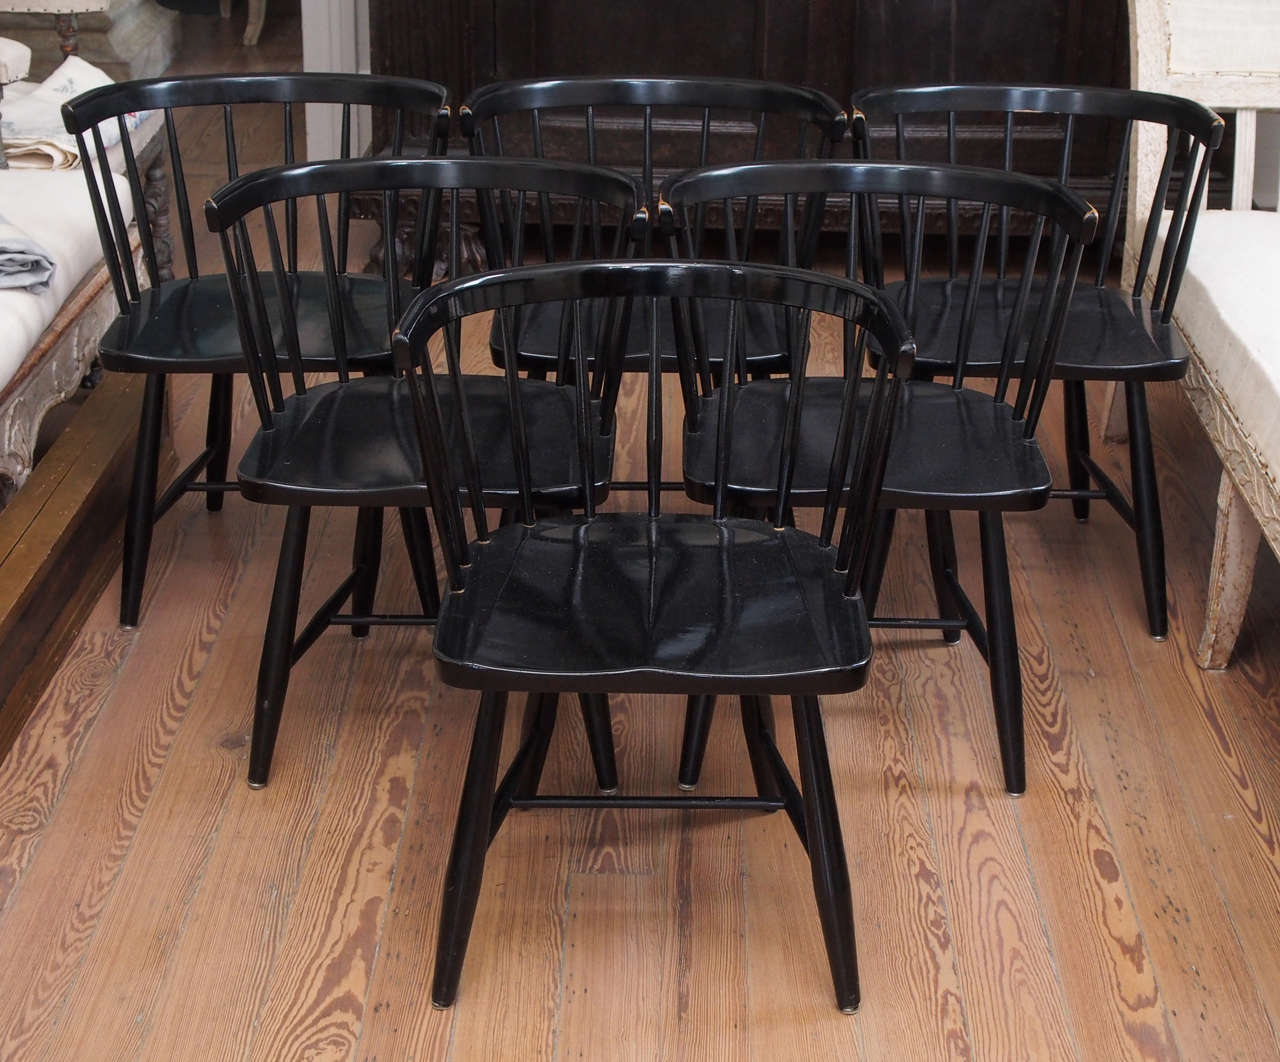 Attractive set of 12 black-lacquered barrel-back dining chairs.